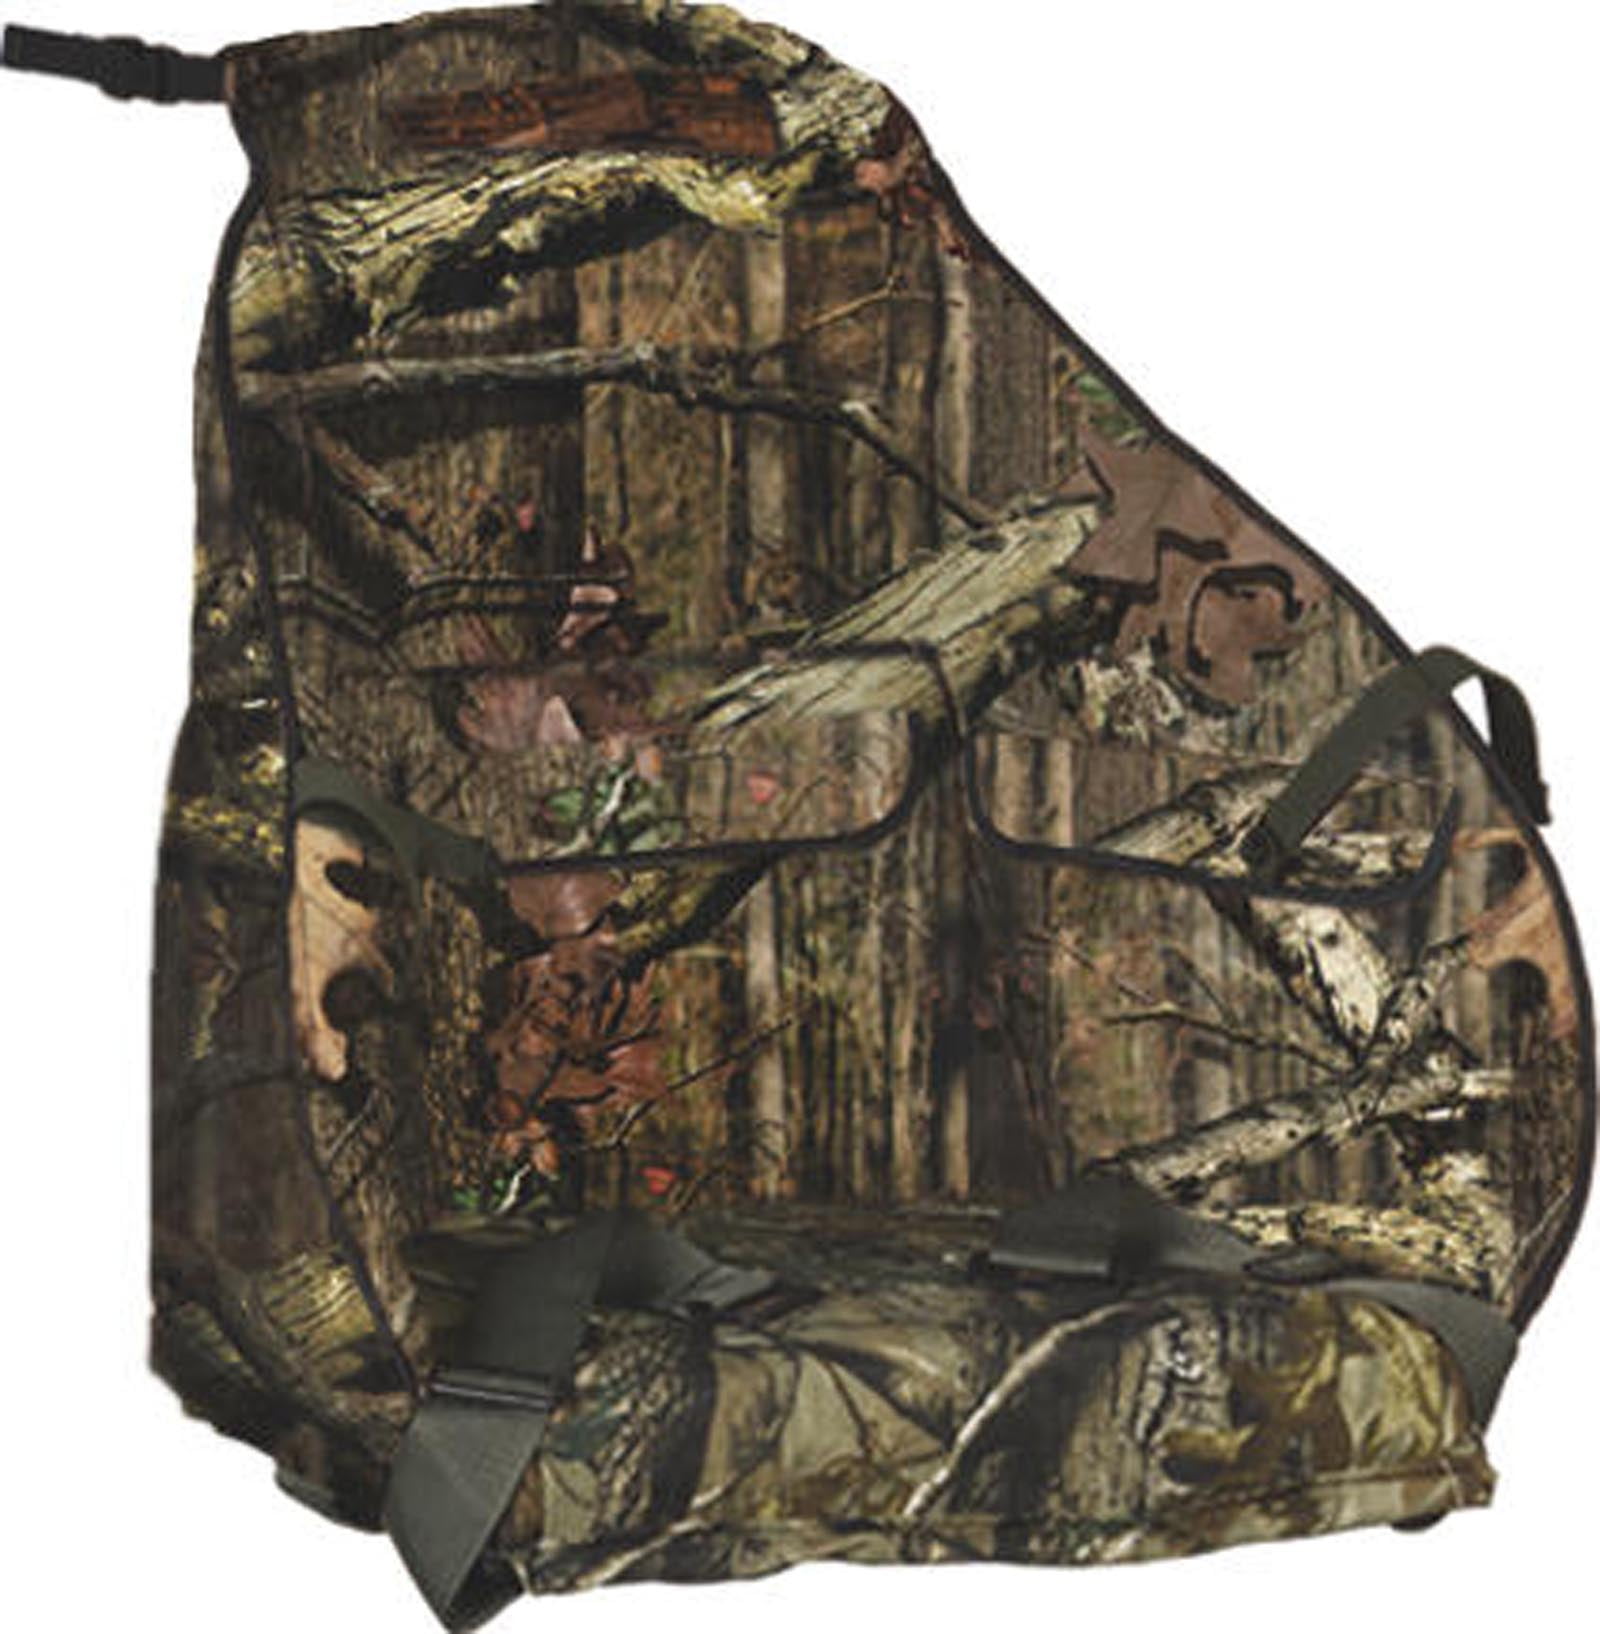 Summit Treestands Universal Seat Mossy Oak Camo Removable Replacement 